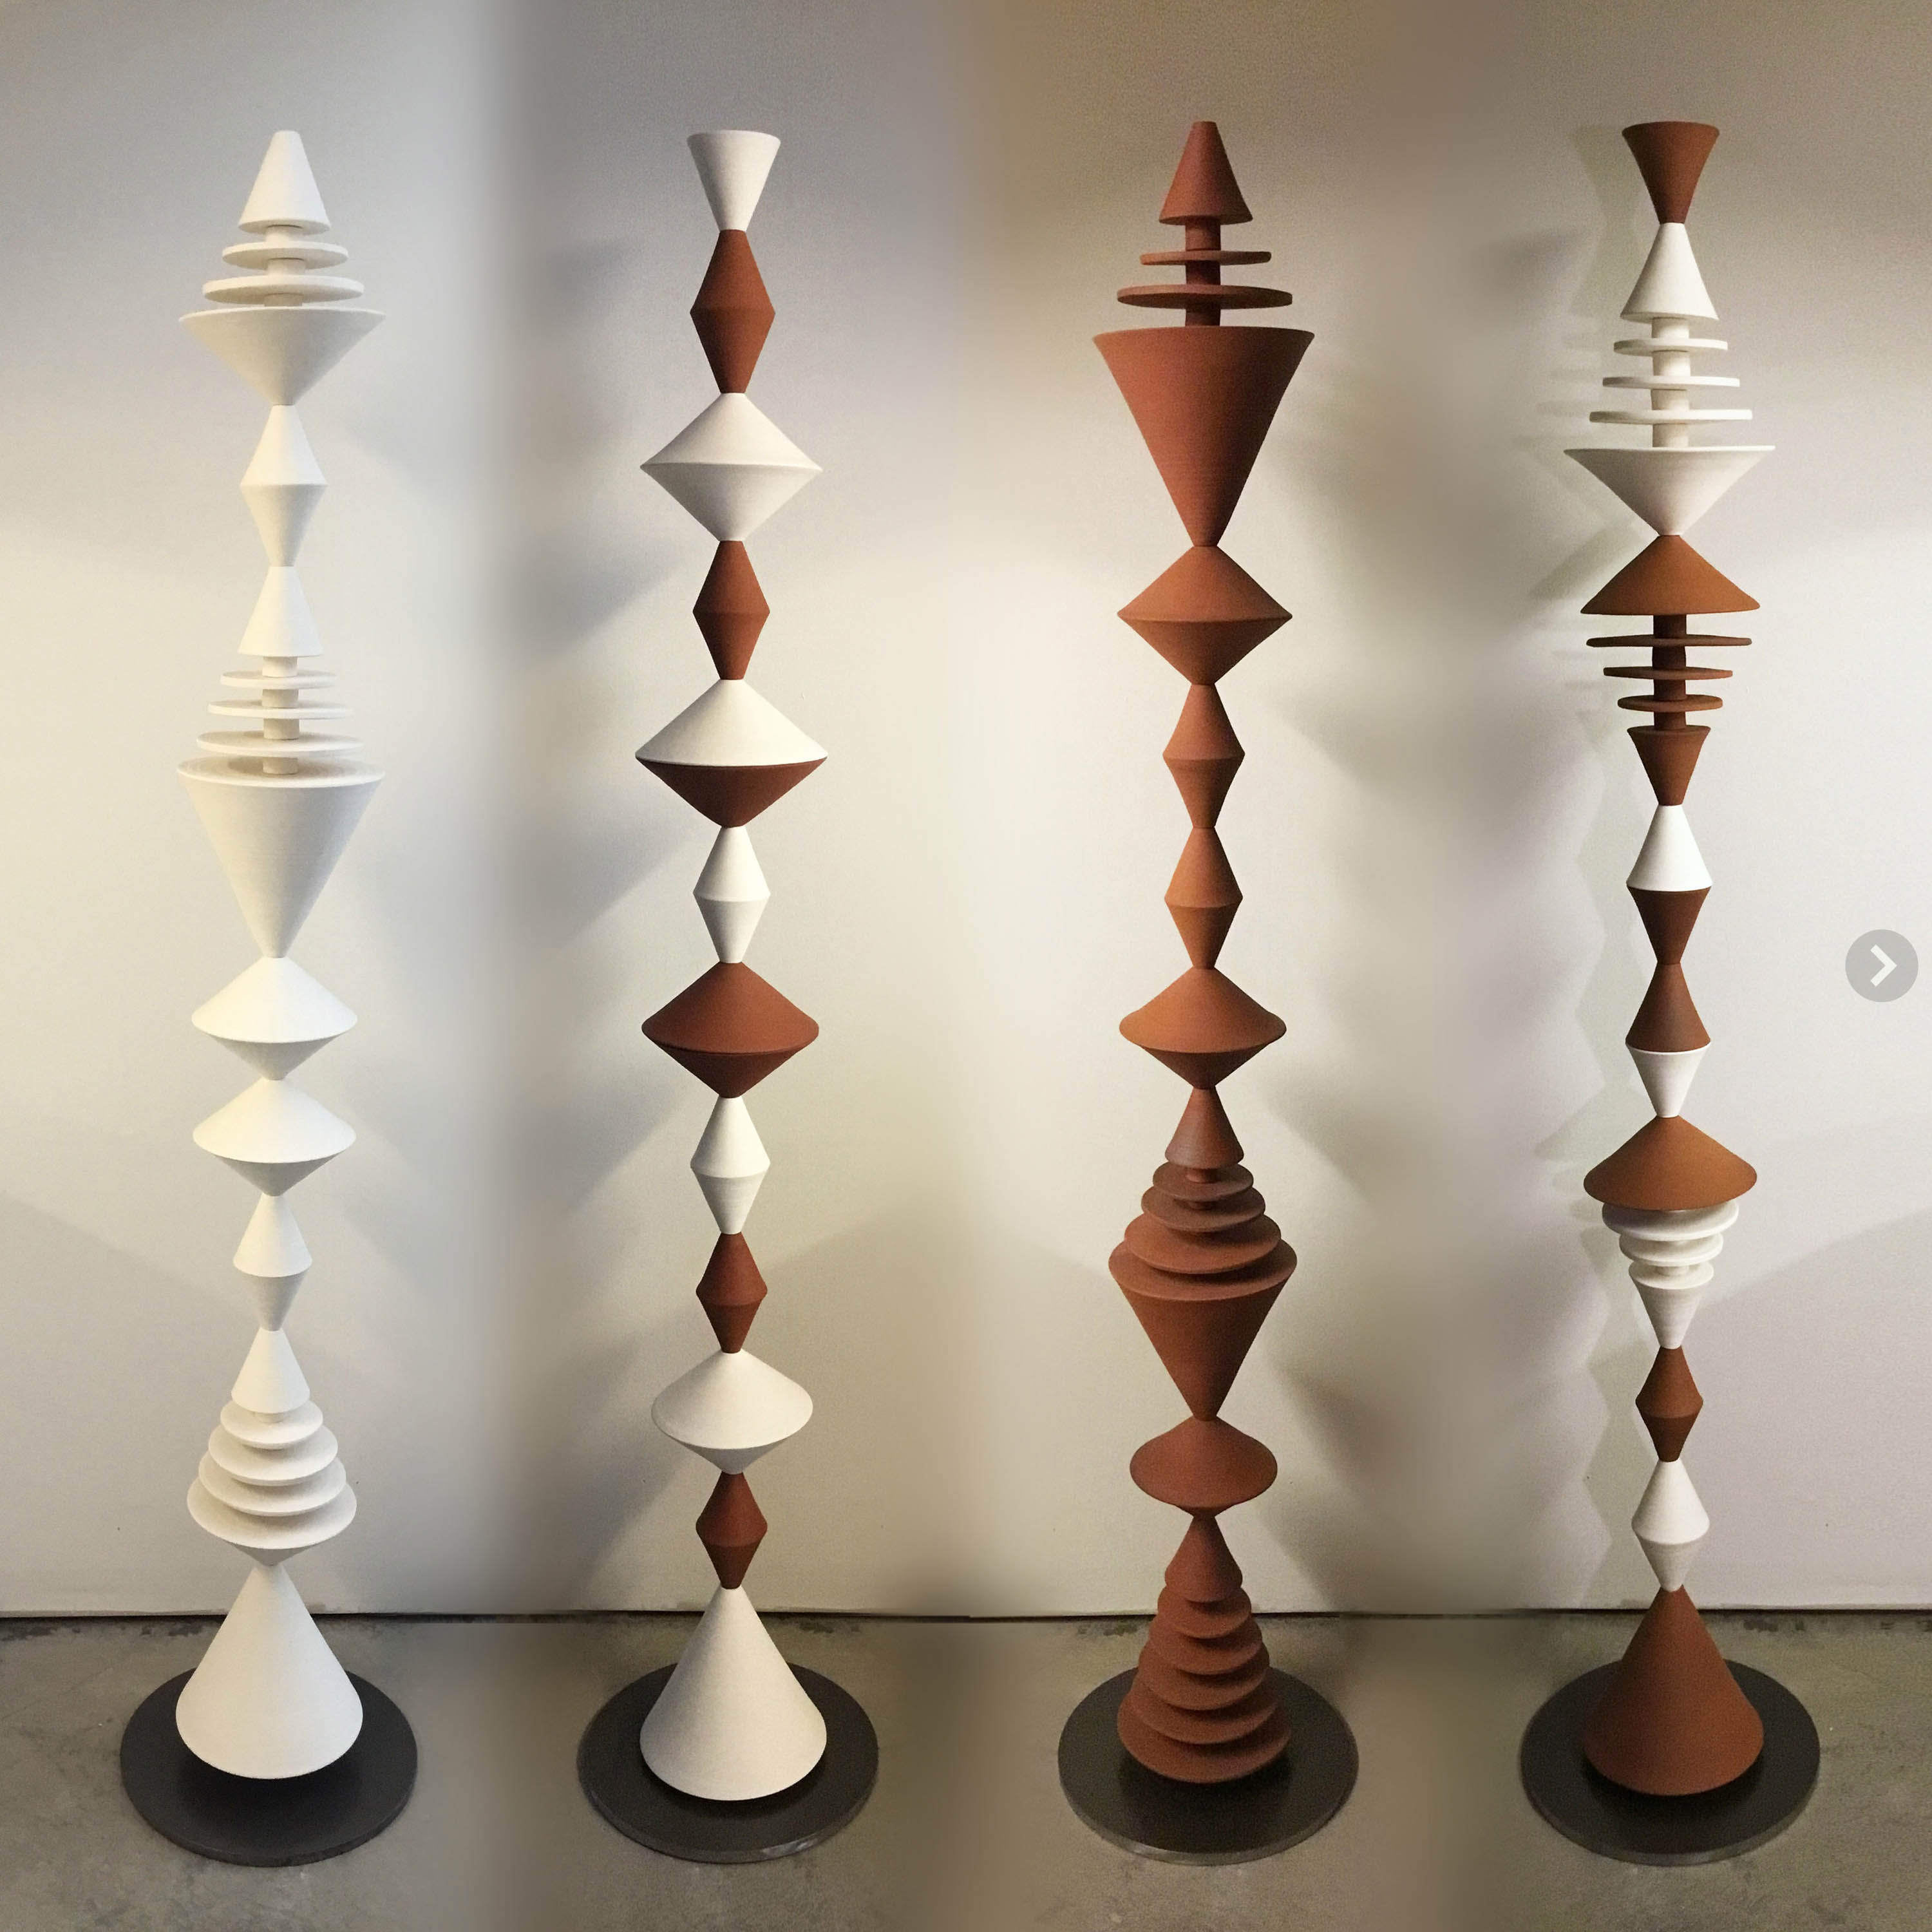 Ceramic sculptures, composed from modular handmade pieces. With a nod to mid-century modern, the geometric forms repeat playfully, complementing modern interiors and architecture. 11 to 60 inches tall, stoneware, pottery decor.